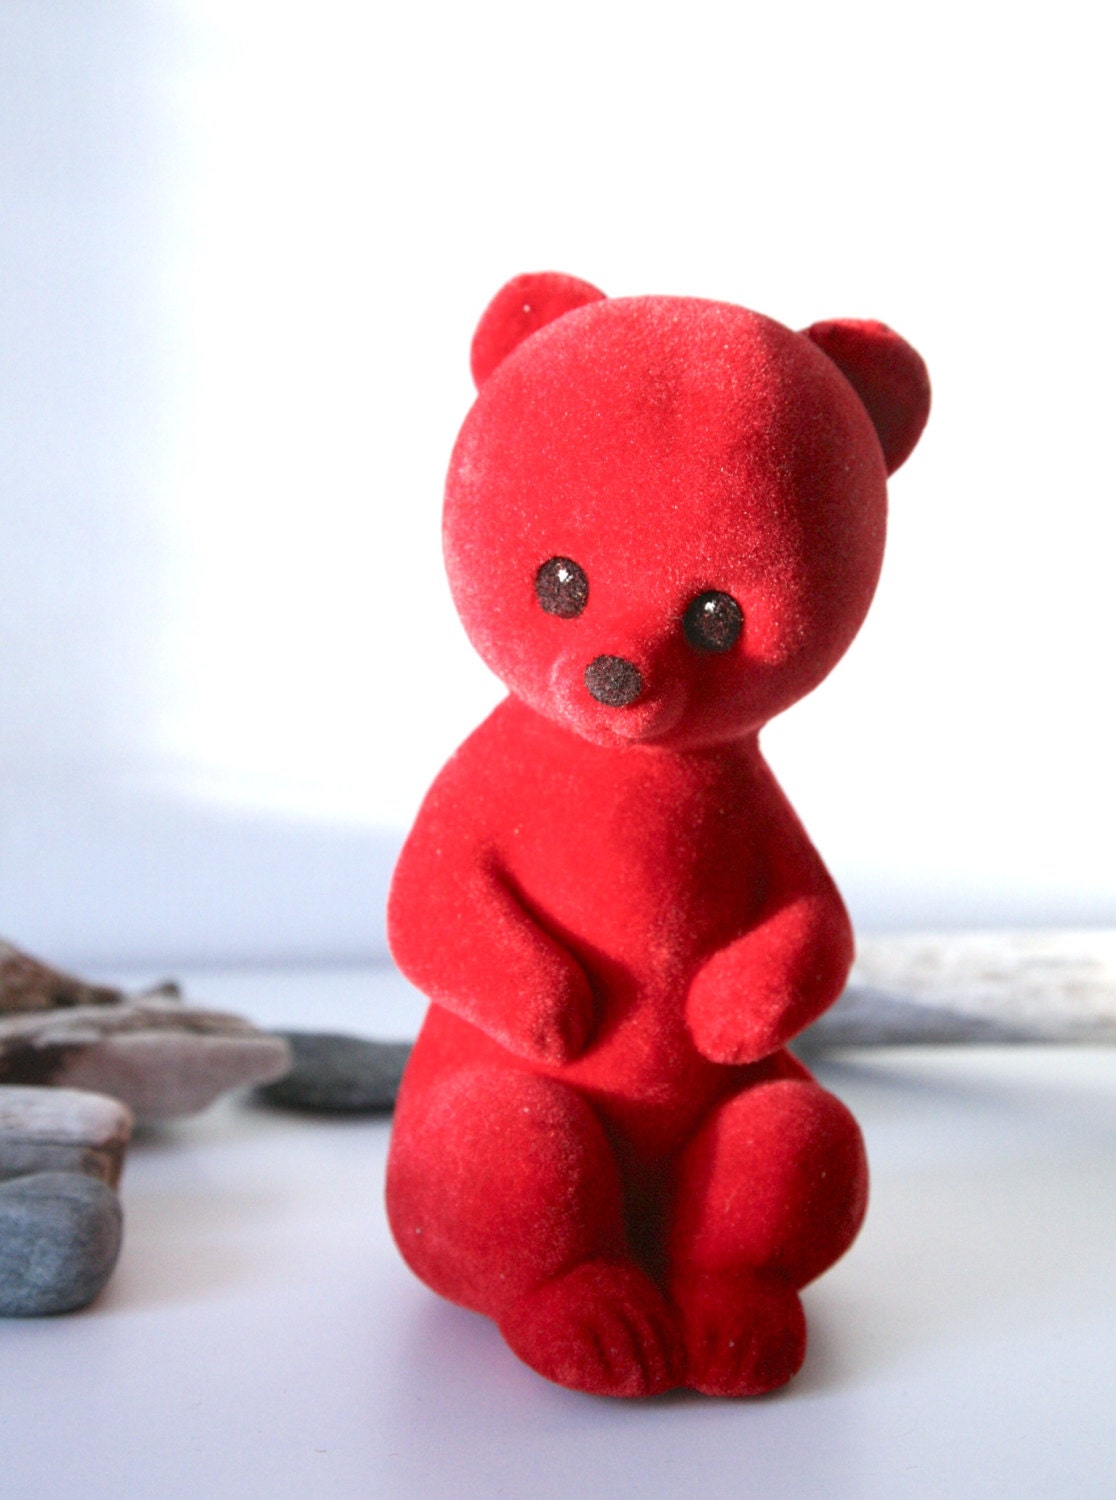 Vintage Flocked Toy Red Russian Bear Misha 1970s - TwoRedSuitcases